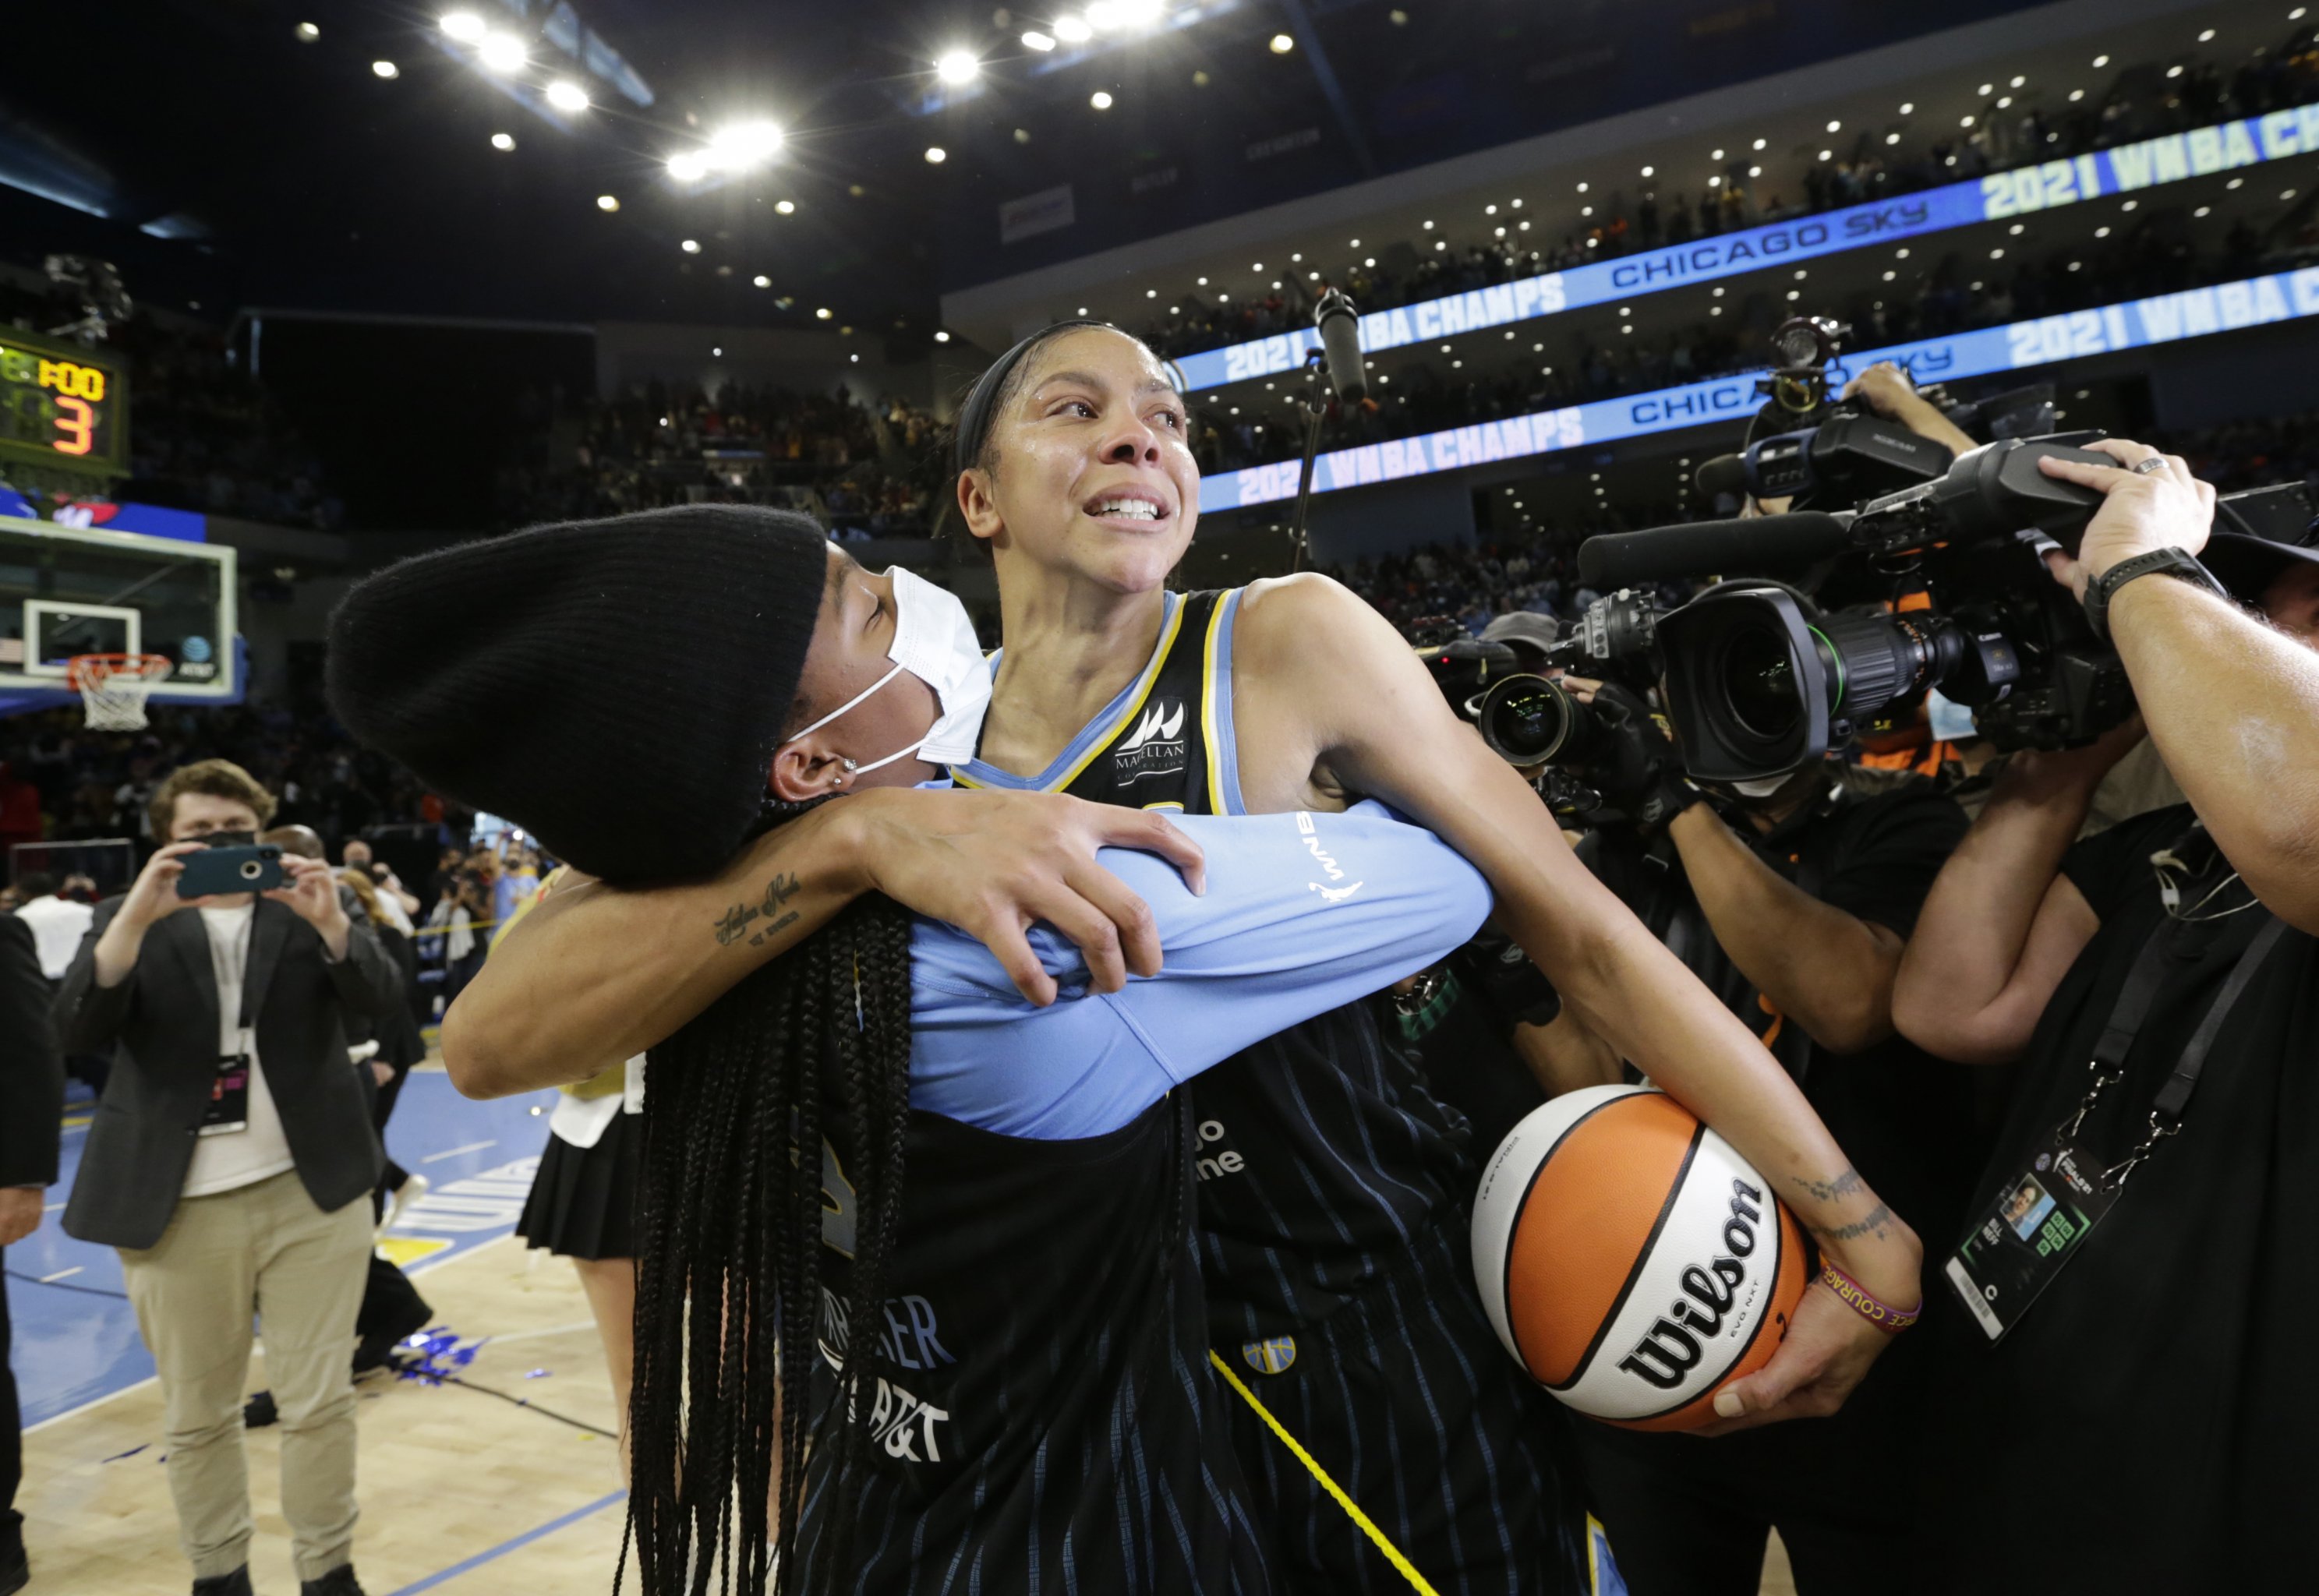 Candace Parker won the WNBA title and proved everyone wrong along